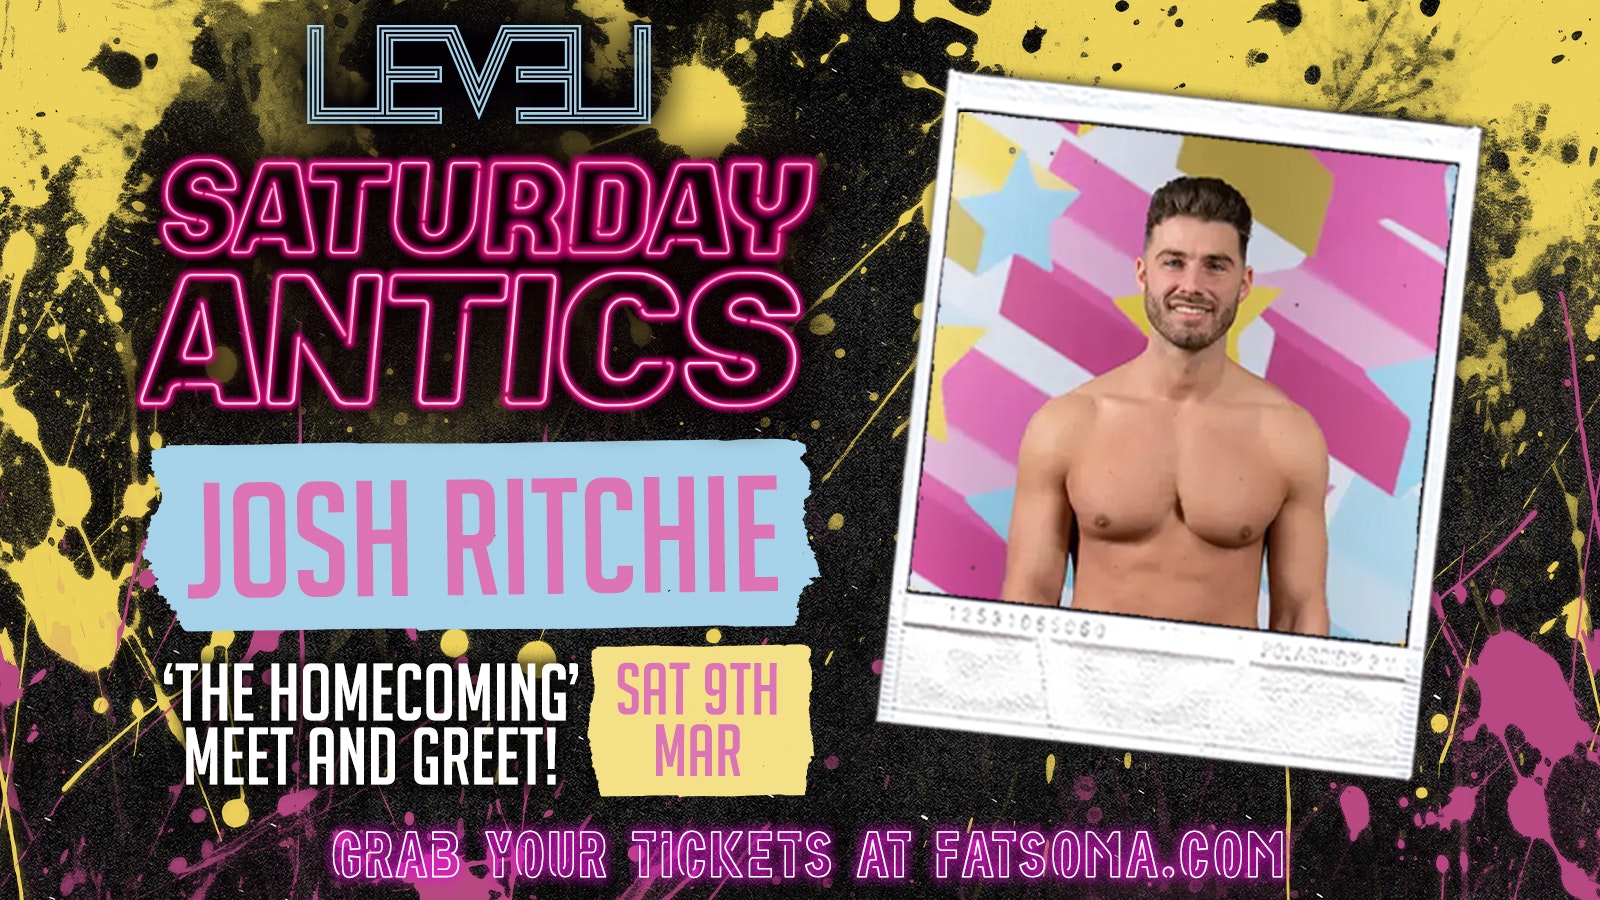 SATURDAY ANTICS – Love Island Takeover – Josh Ritchie – The Home Coming Meet and Greet